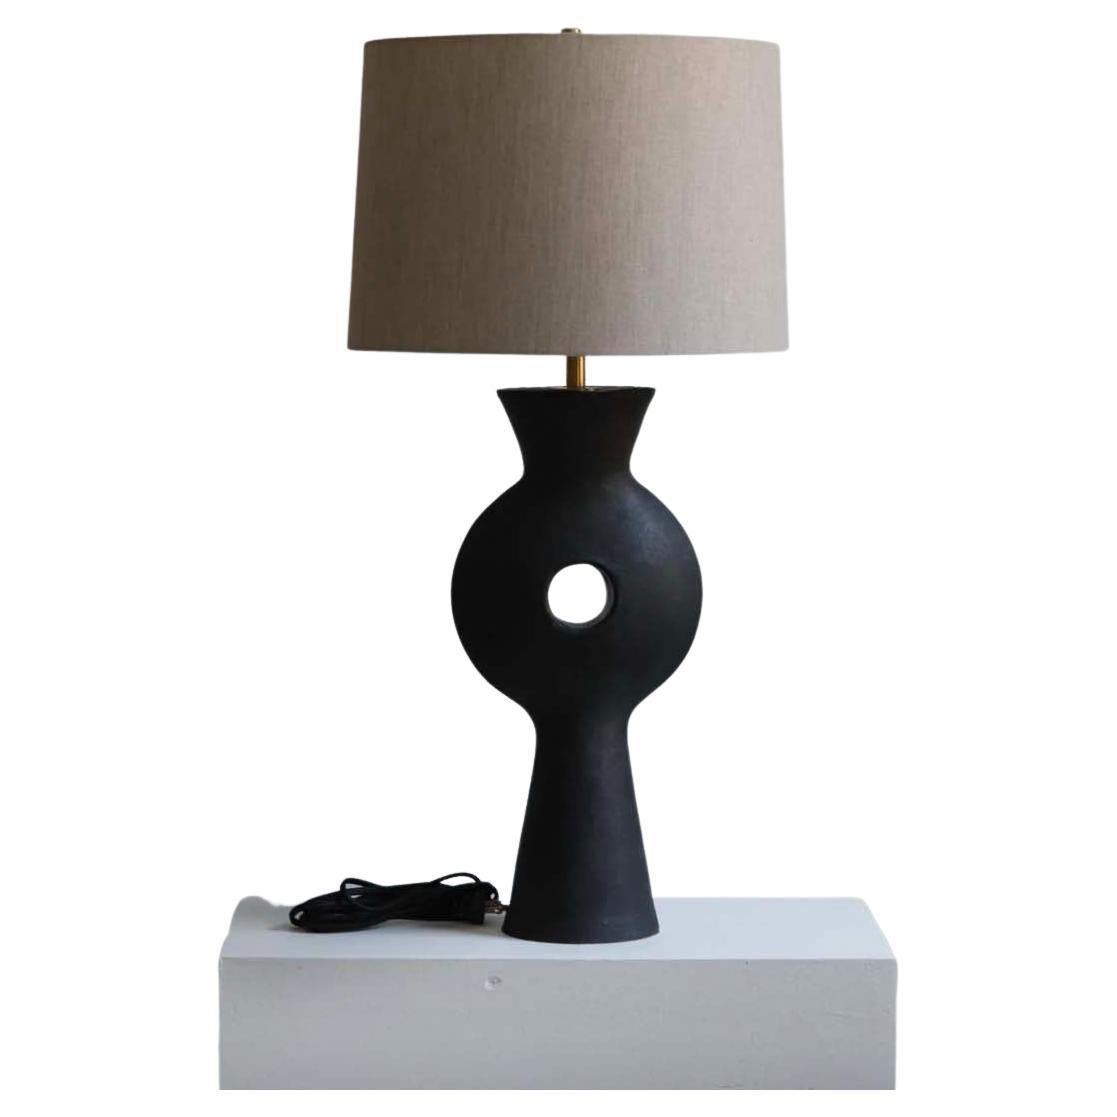 The Linus lamp is handmade studio pottery by ceramic artist by Danny Kaplan. Shade included. Please note exact dimensions may vary.

Born in New York City and raised in Aix-en-Provence, France, Danny Kaplan’s passion for ceramics was shaped by early